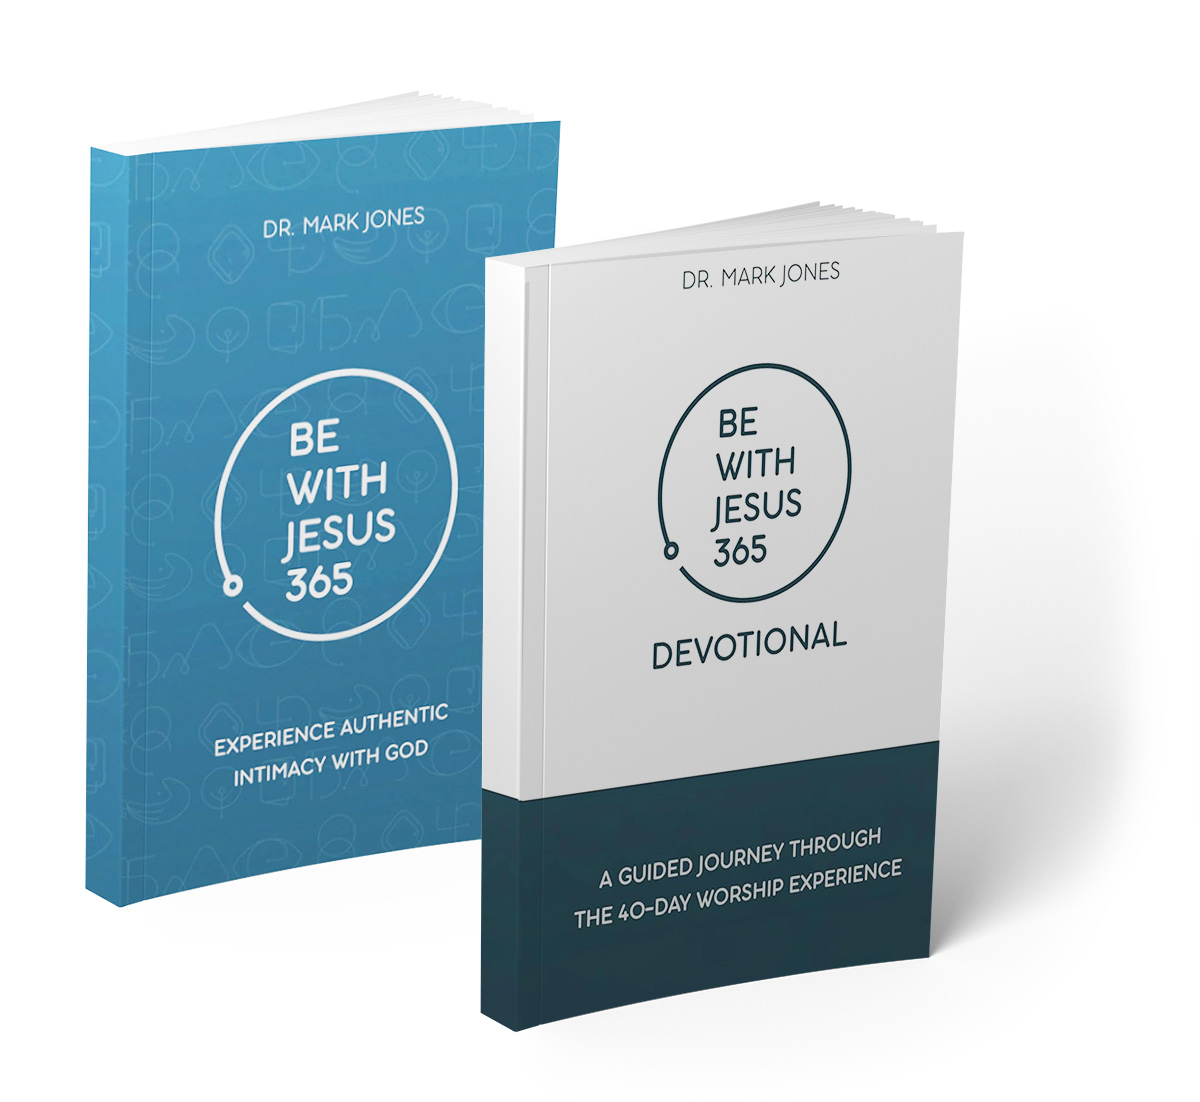 Be with Jesus 365: Experience Authentic Intimacy with God book and accompanying devotional book by Dr. Mark Jones